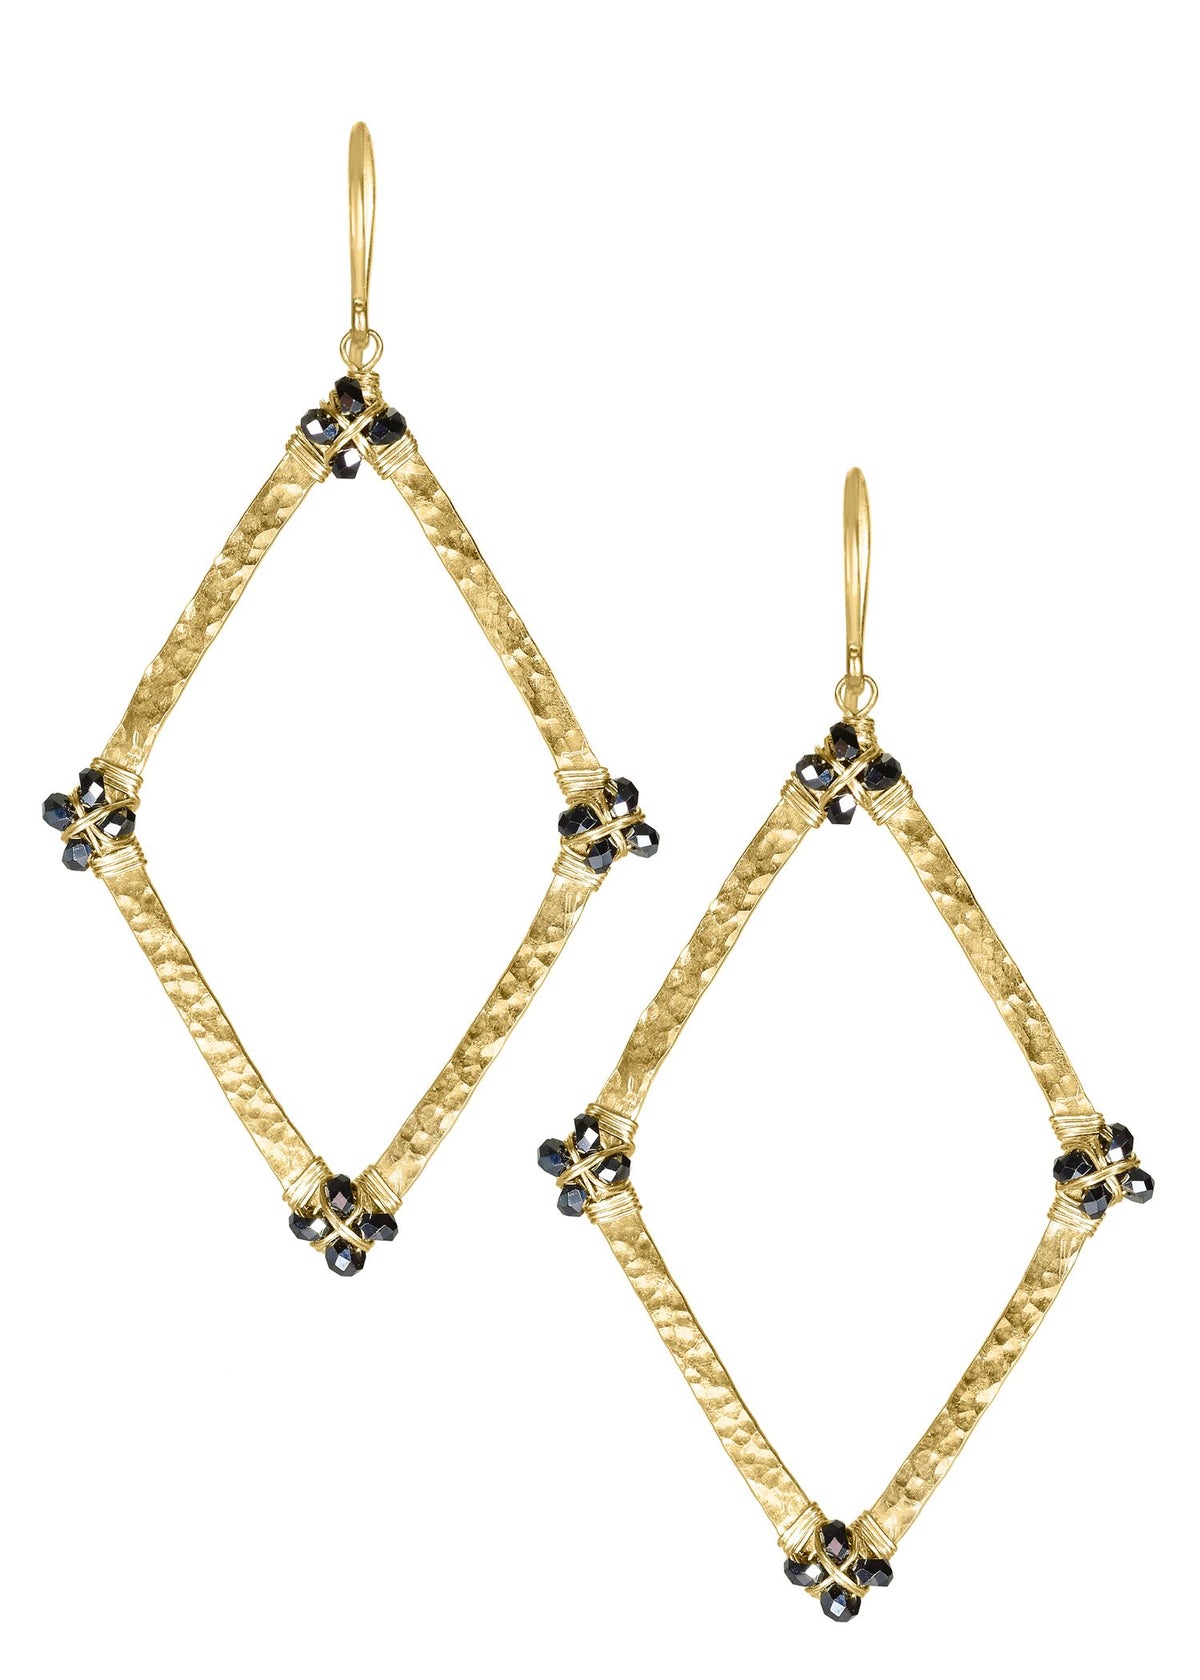 Black spinel 14k gold fill Earrings measure 2&quot; in length (including the ear wires) and 1&quot; in width Handmade in our Los Angeles studio